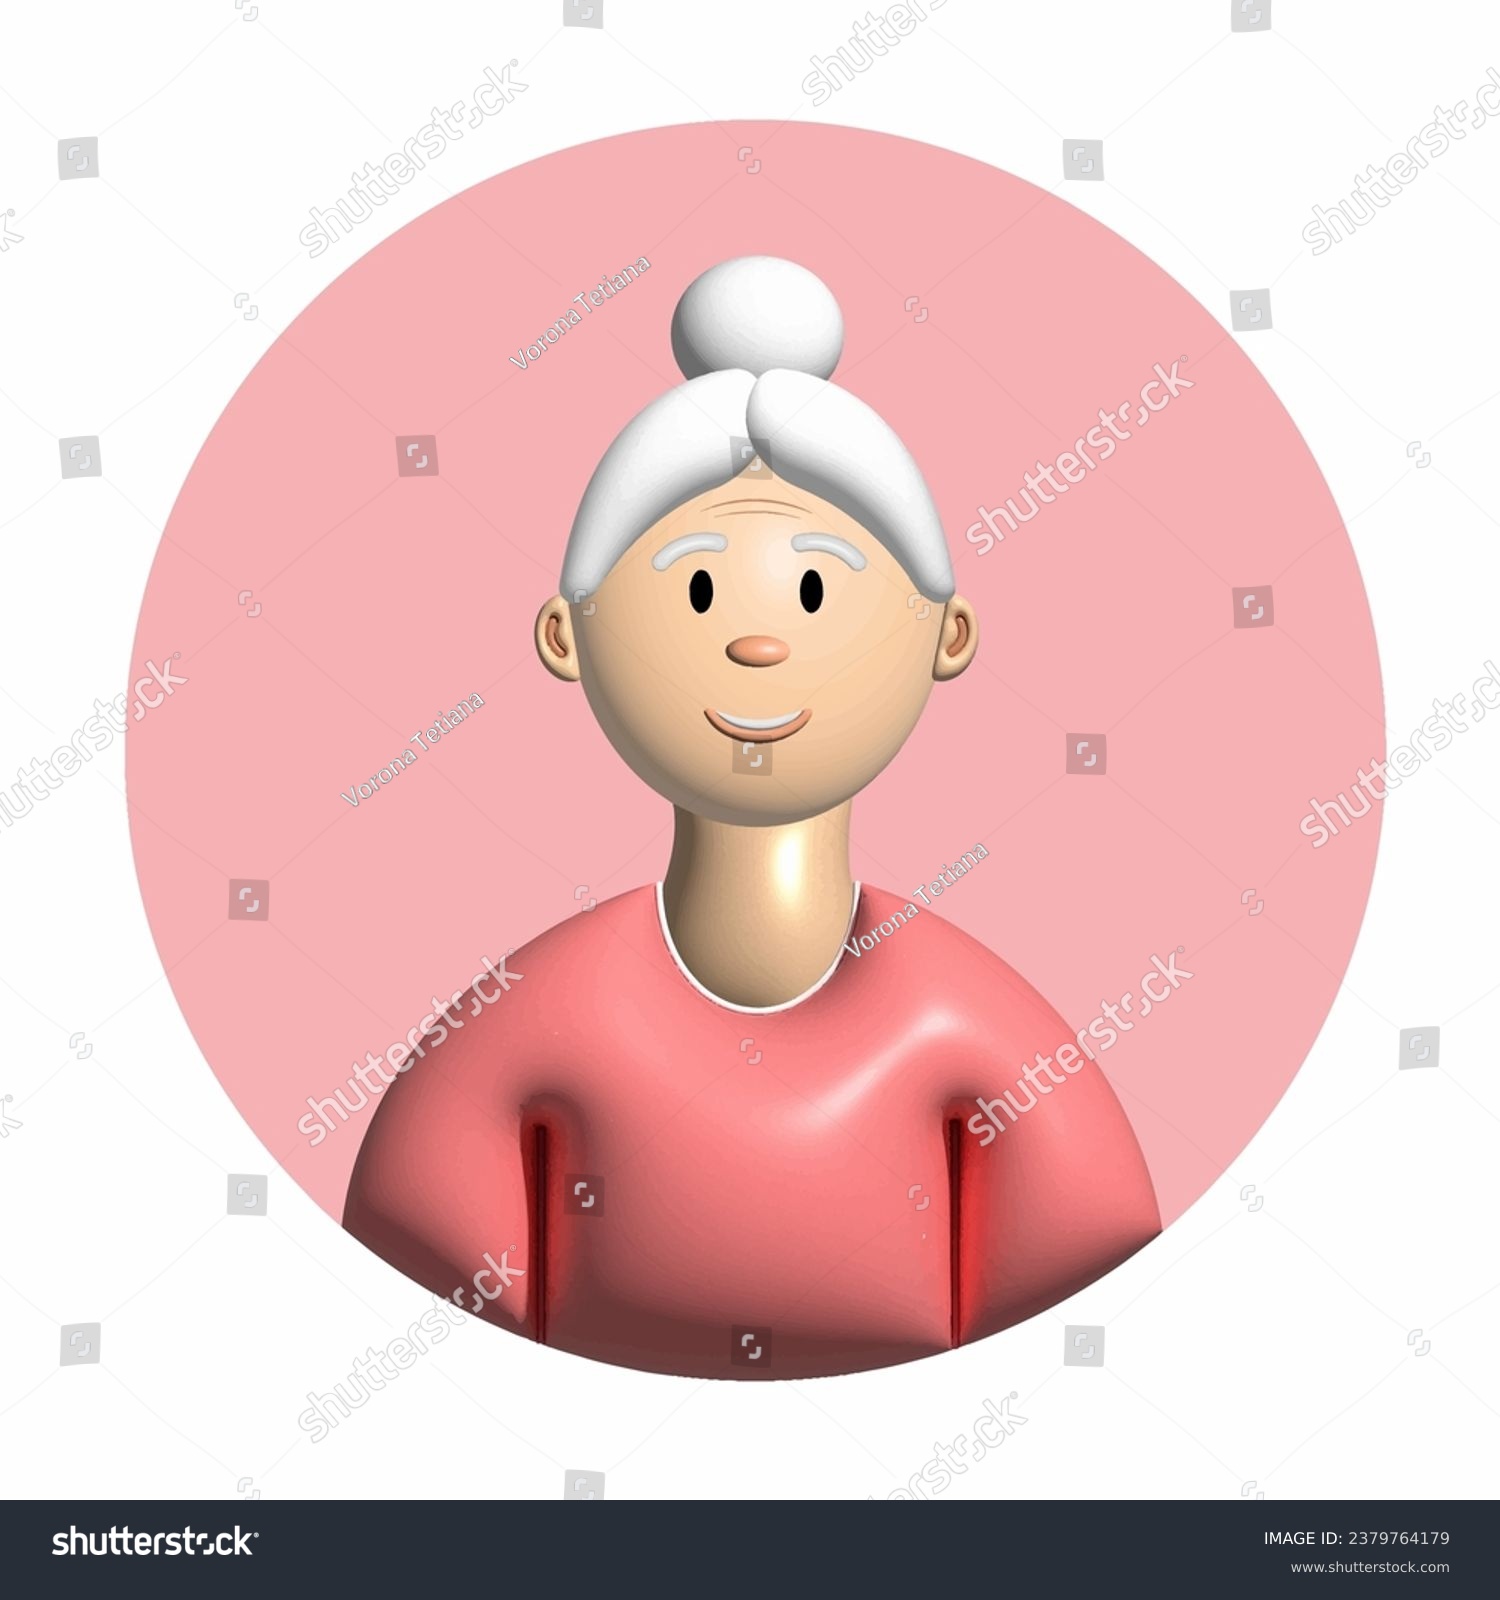 SVG of 3D avatar of a gray-haired elderly woman on a pink round background. Grandmother, woman of advanced years, old woman, persioner svg